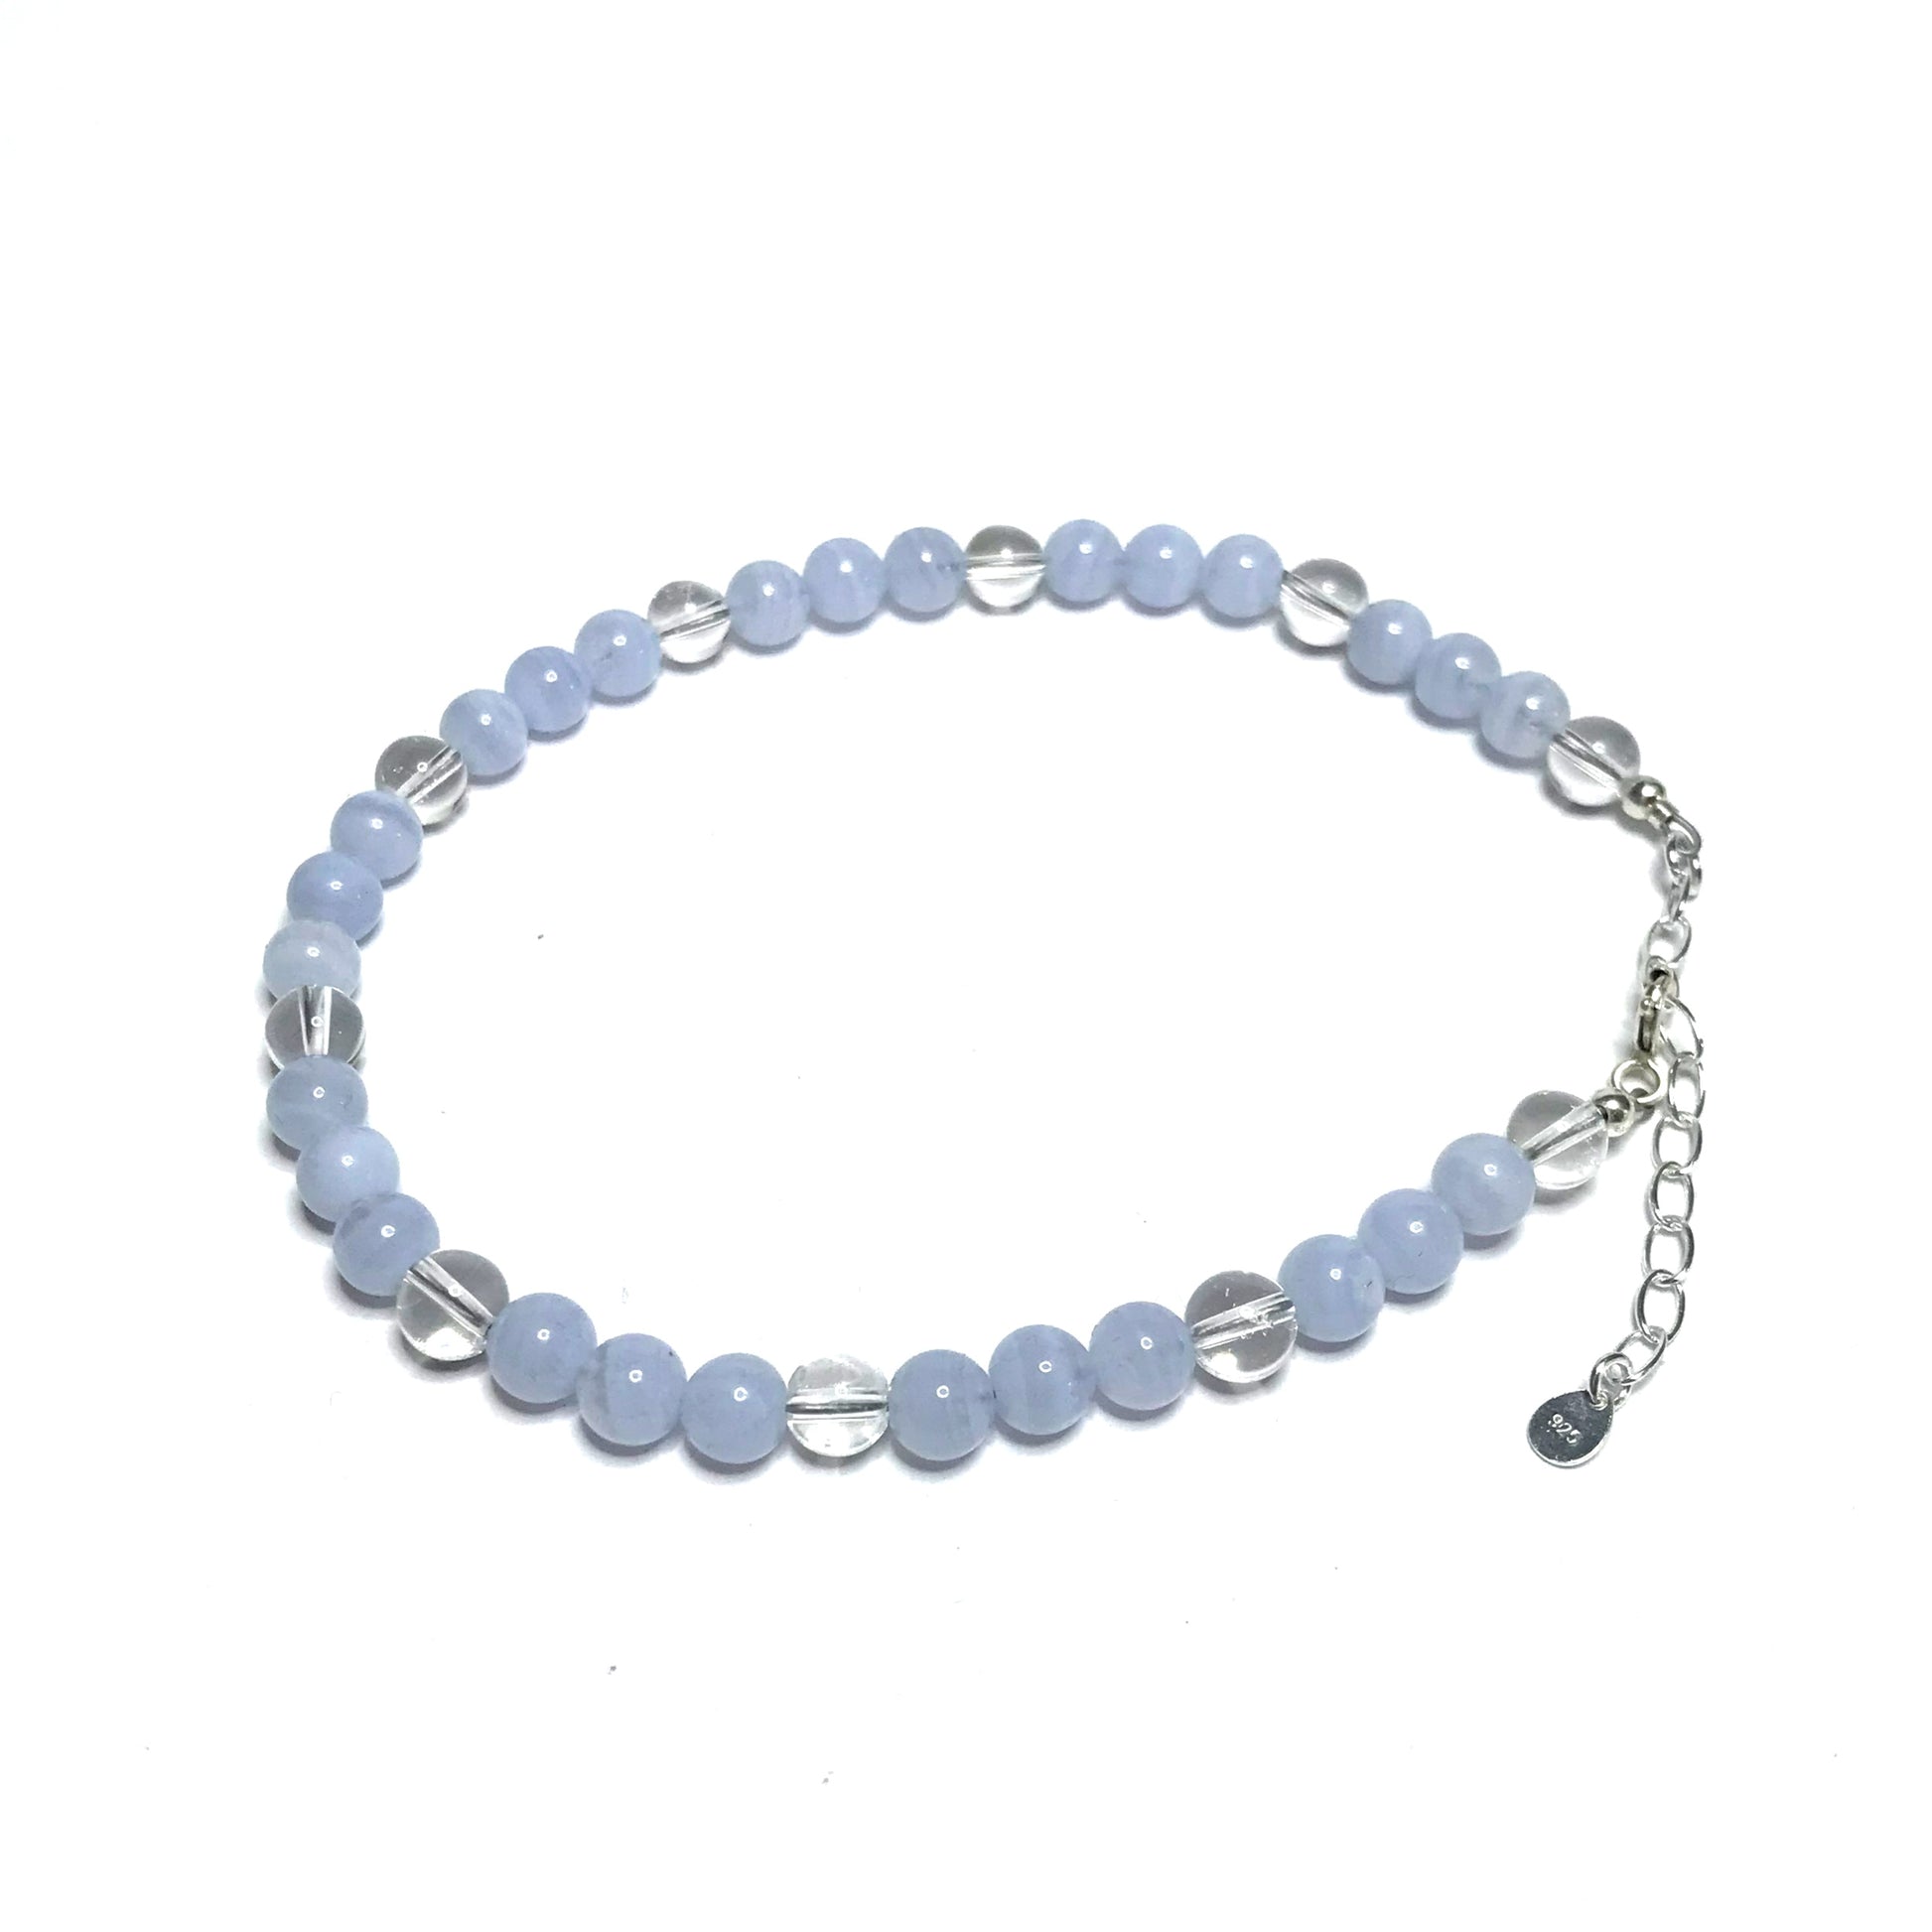 Blue lace agate anklet